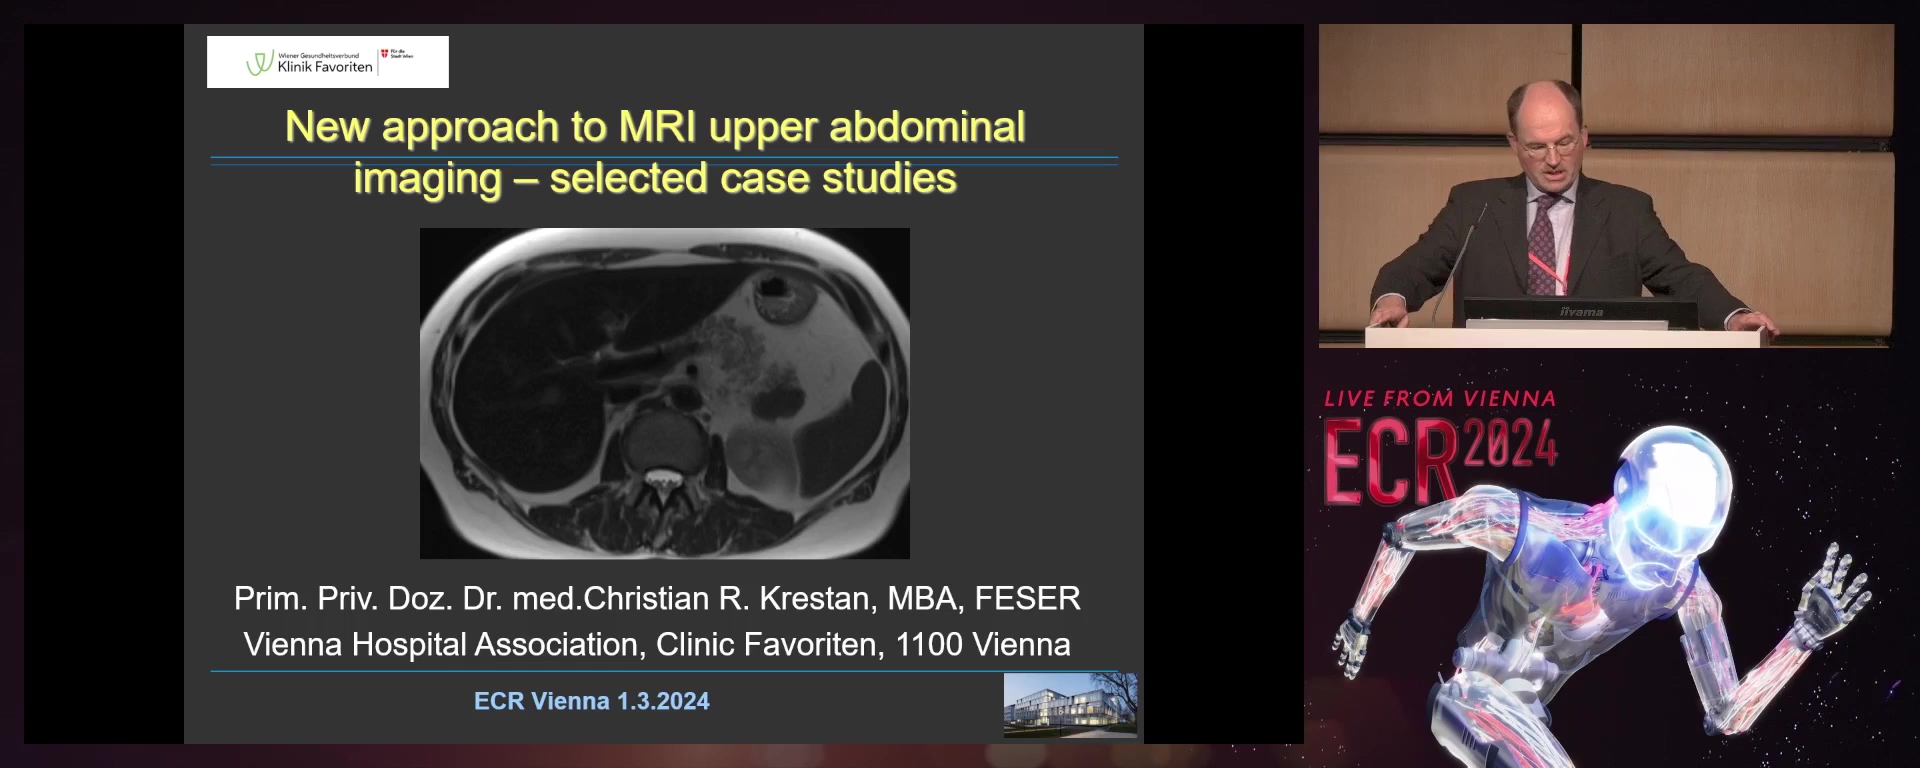 New approach to MRI upper abdominal imaging – selected case studies